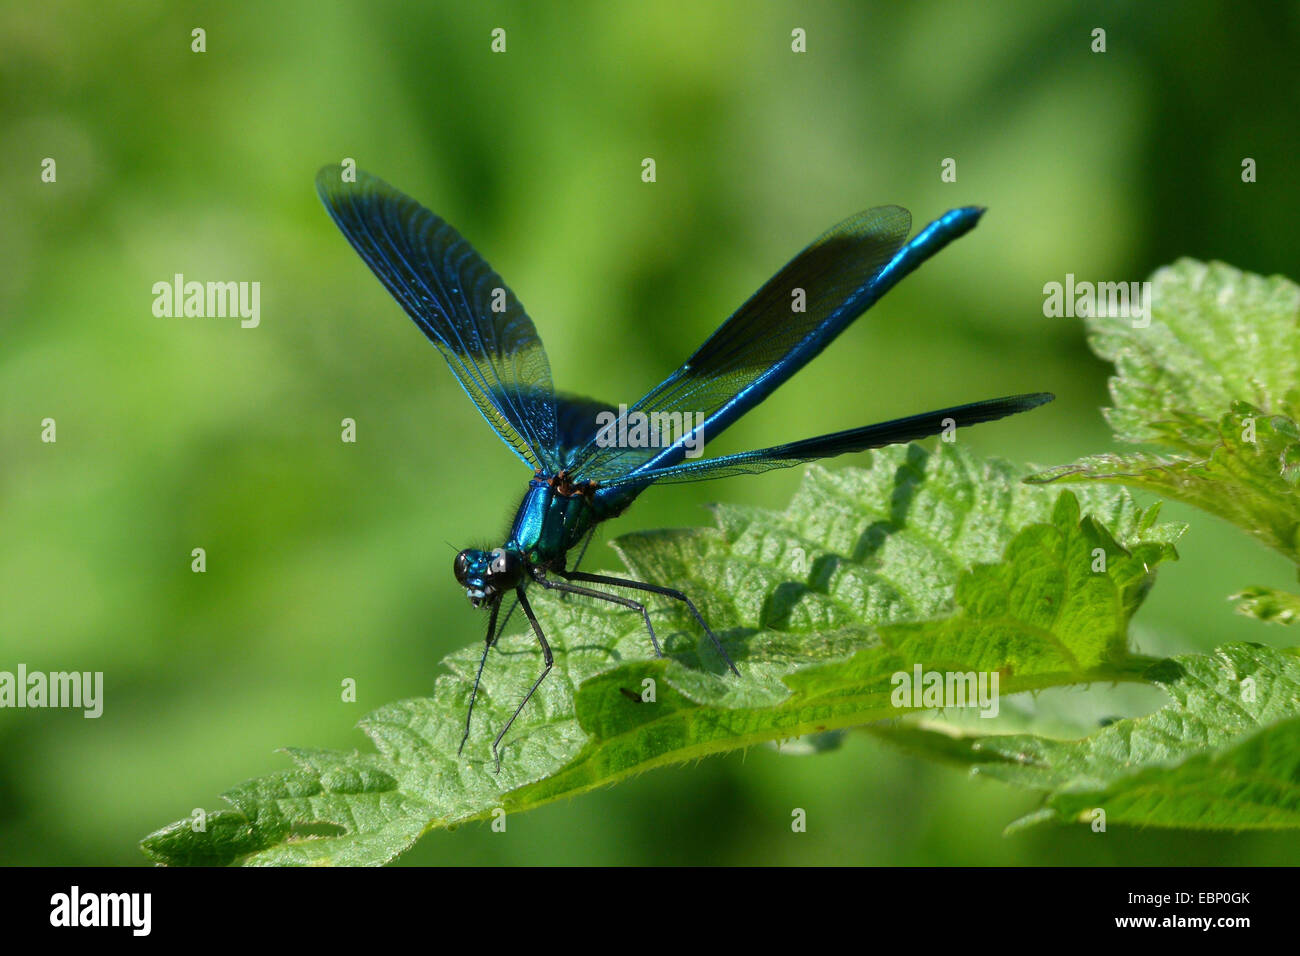 banded blackwings, banded agrion, banded demoiselle (Calopteryx splendens, Agrion splendens), flapping wings, Germany Stock Photo